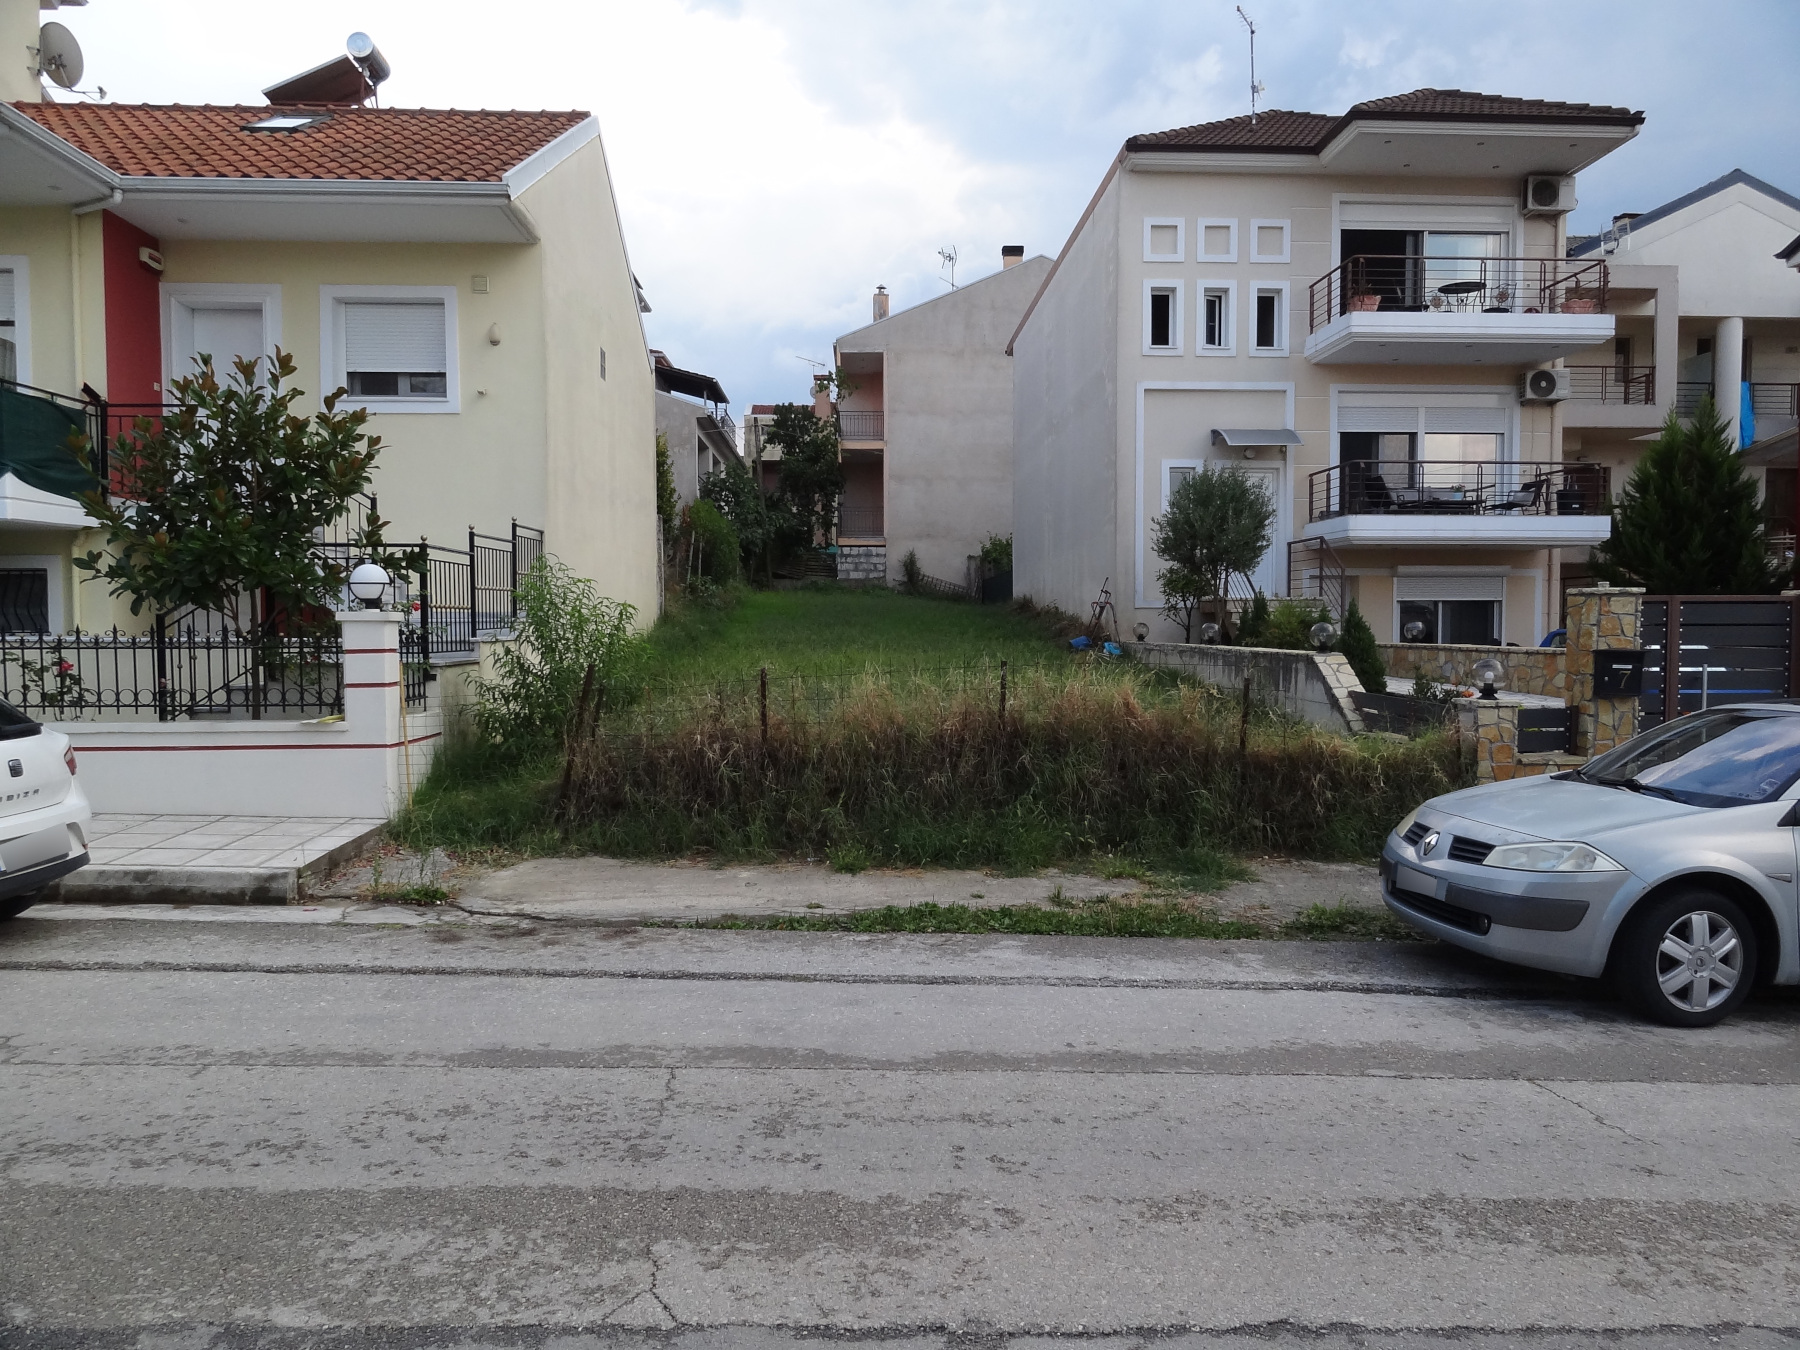 Plot for sale 244 sq.m. with S.D. 0.6 in the Anatoli region of Ioannina